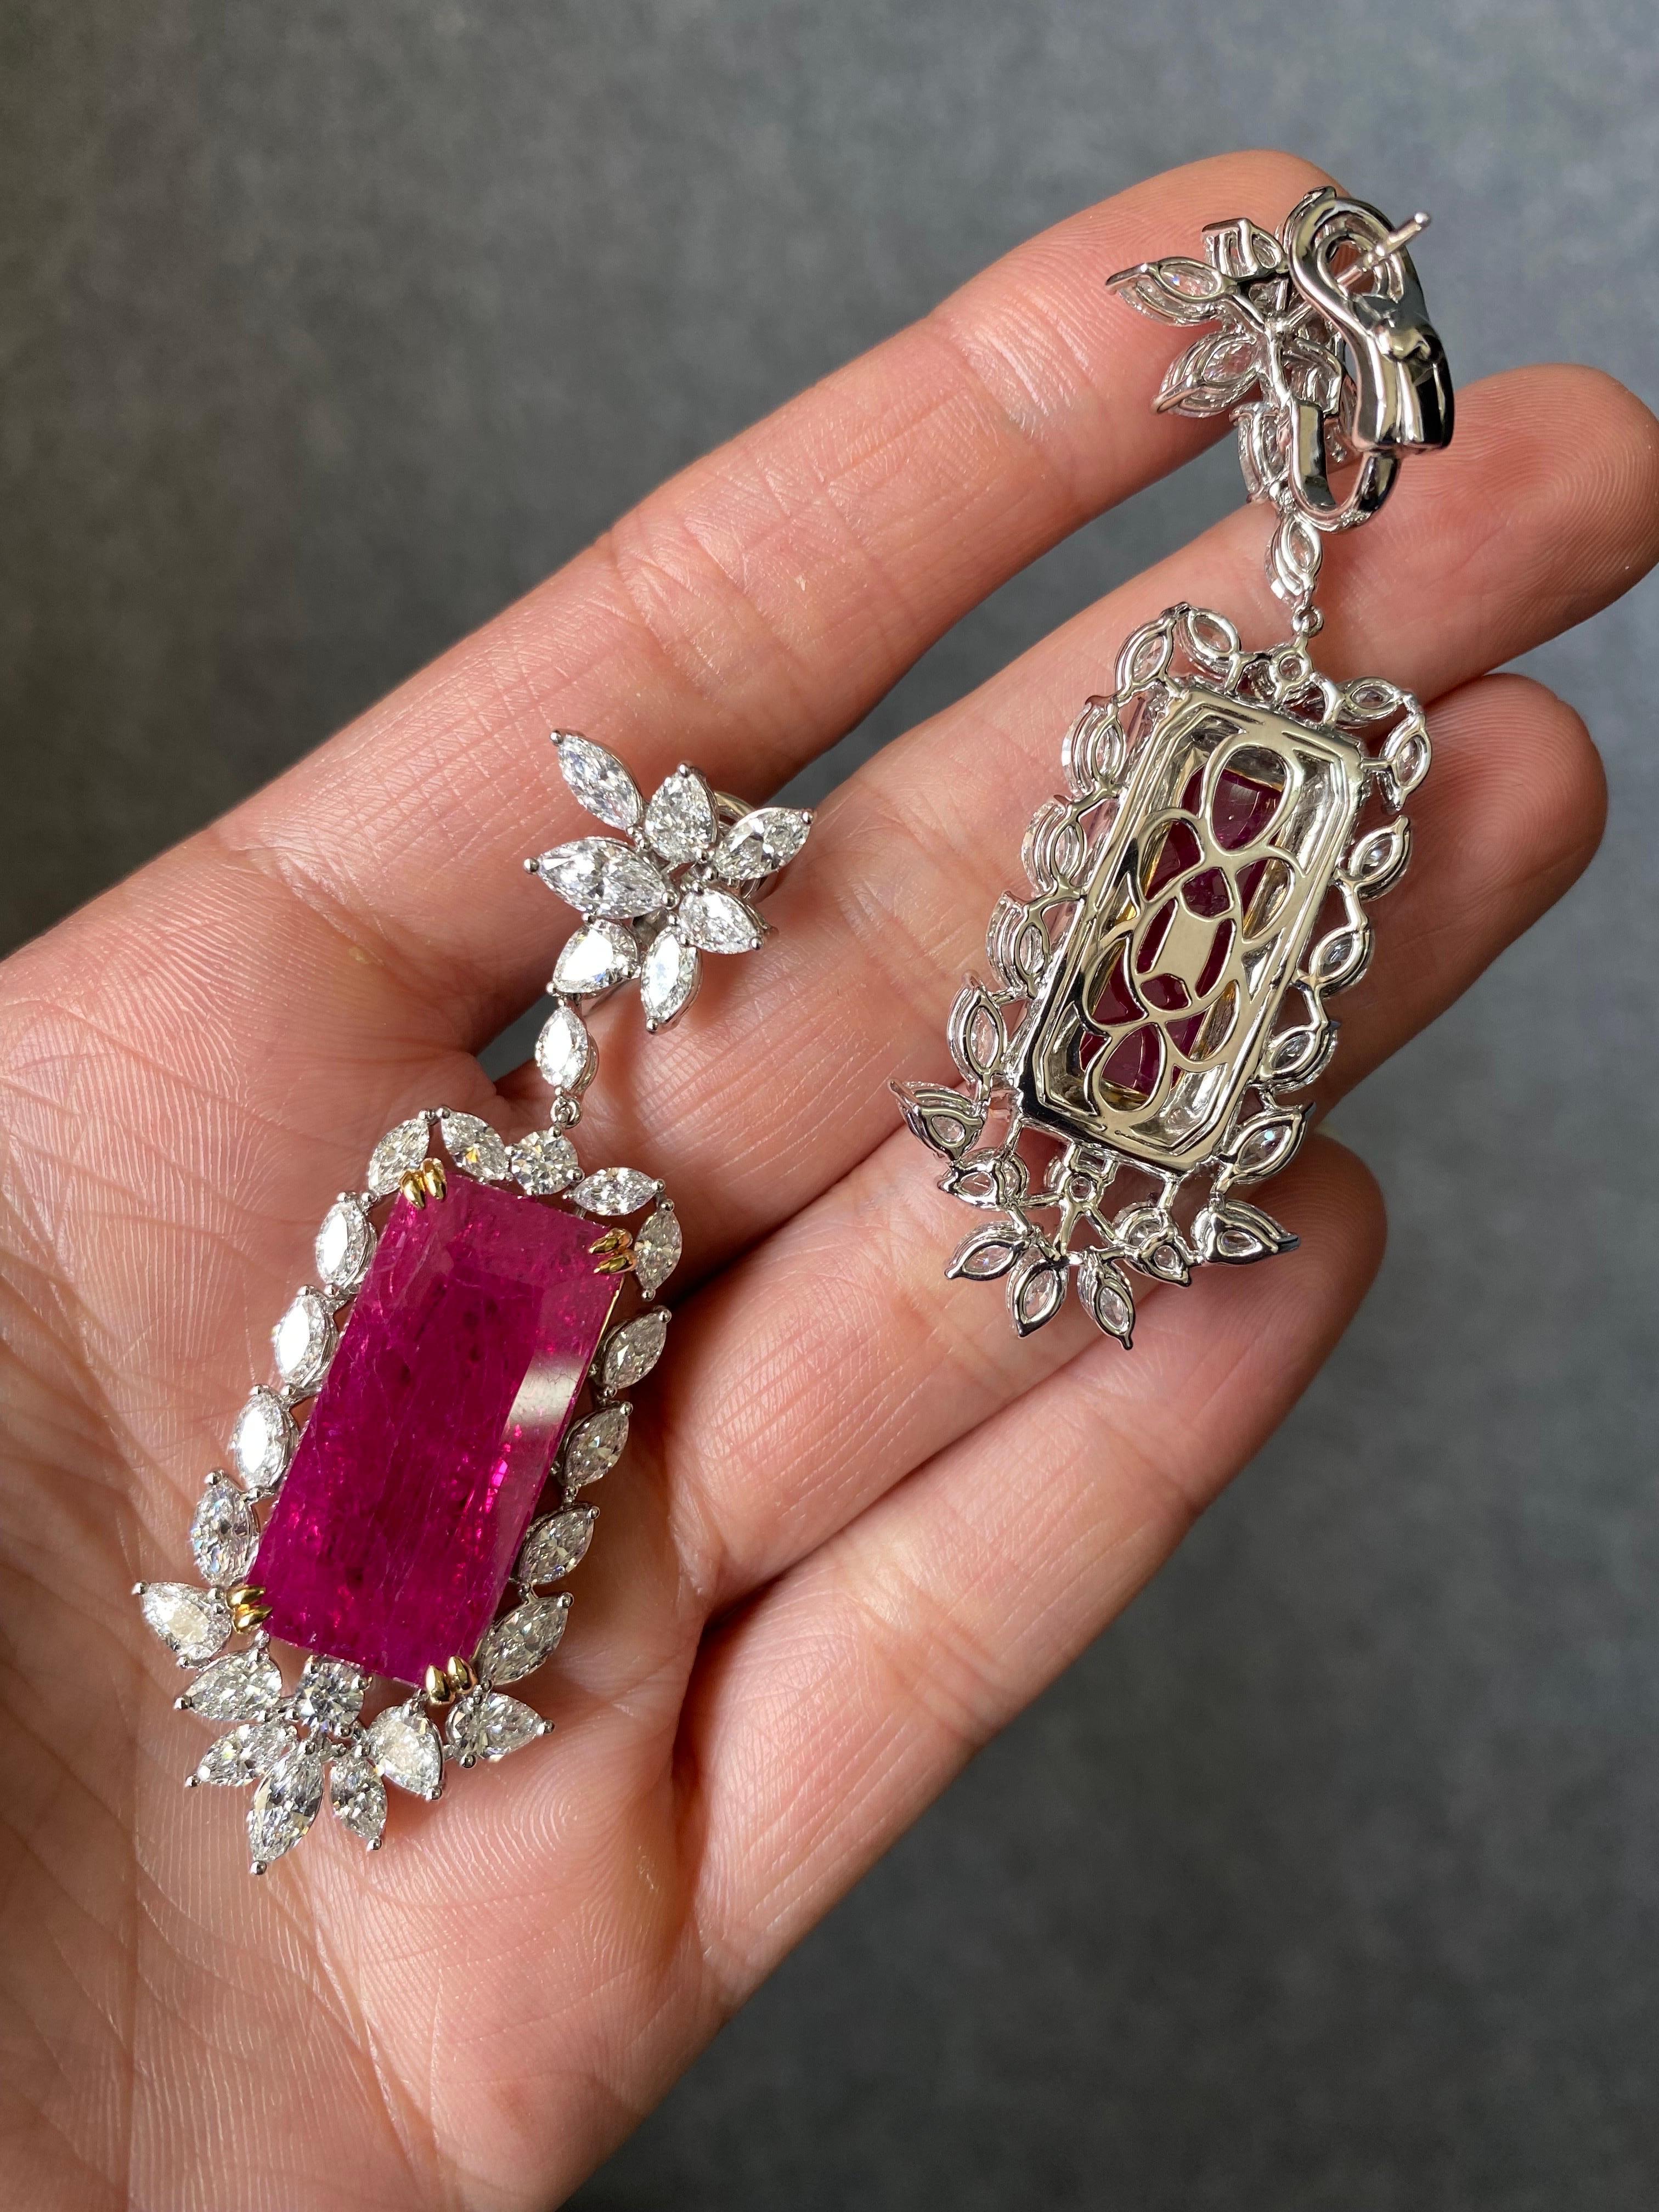 One of a kind 22.07 carat no heat natural no heat Mozambique Ruby earrings, with 7.43 carat VS quality colorless Diamonds. 